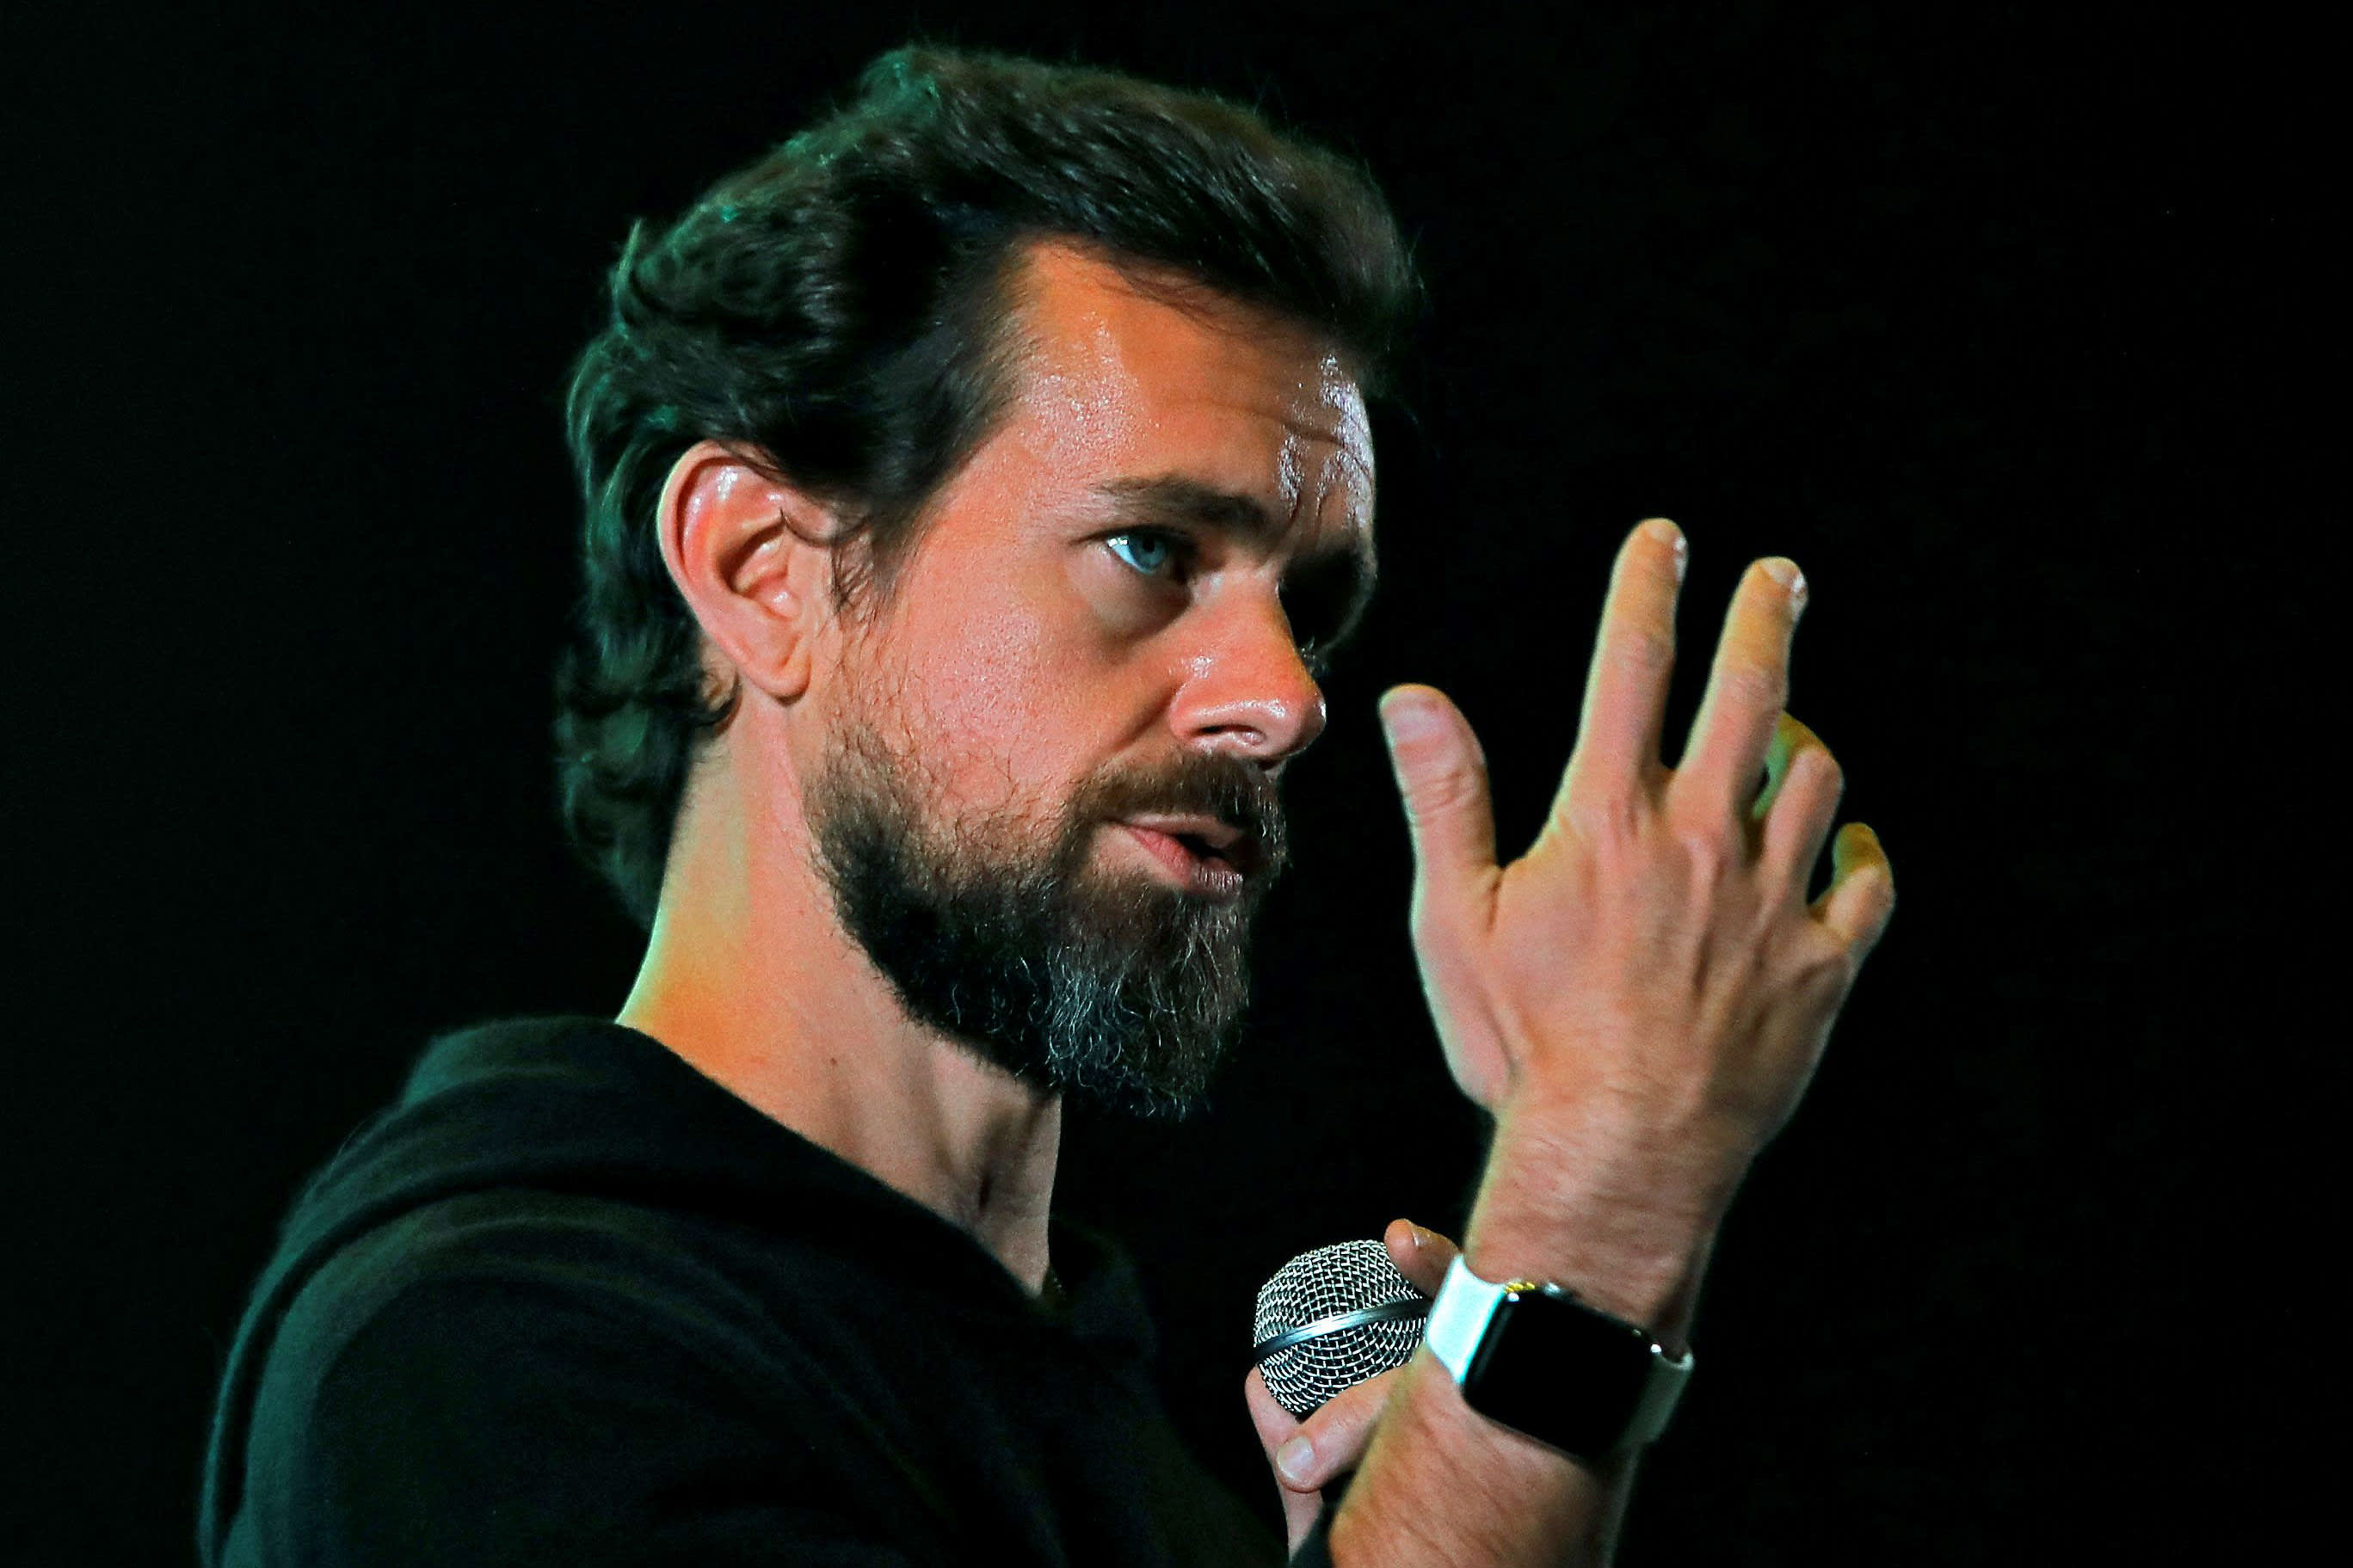 Square CEO Jack Dorsey says the company is considering a new hardware bitcoin wallet